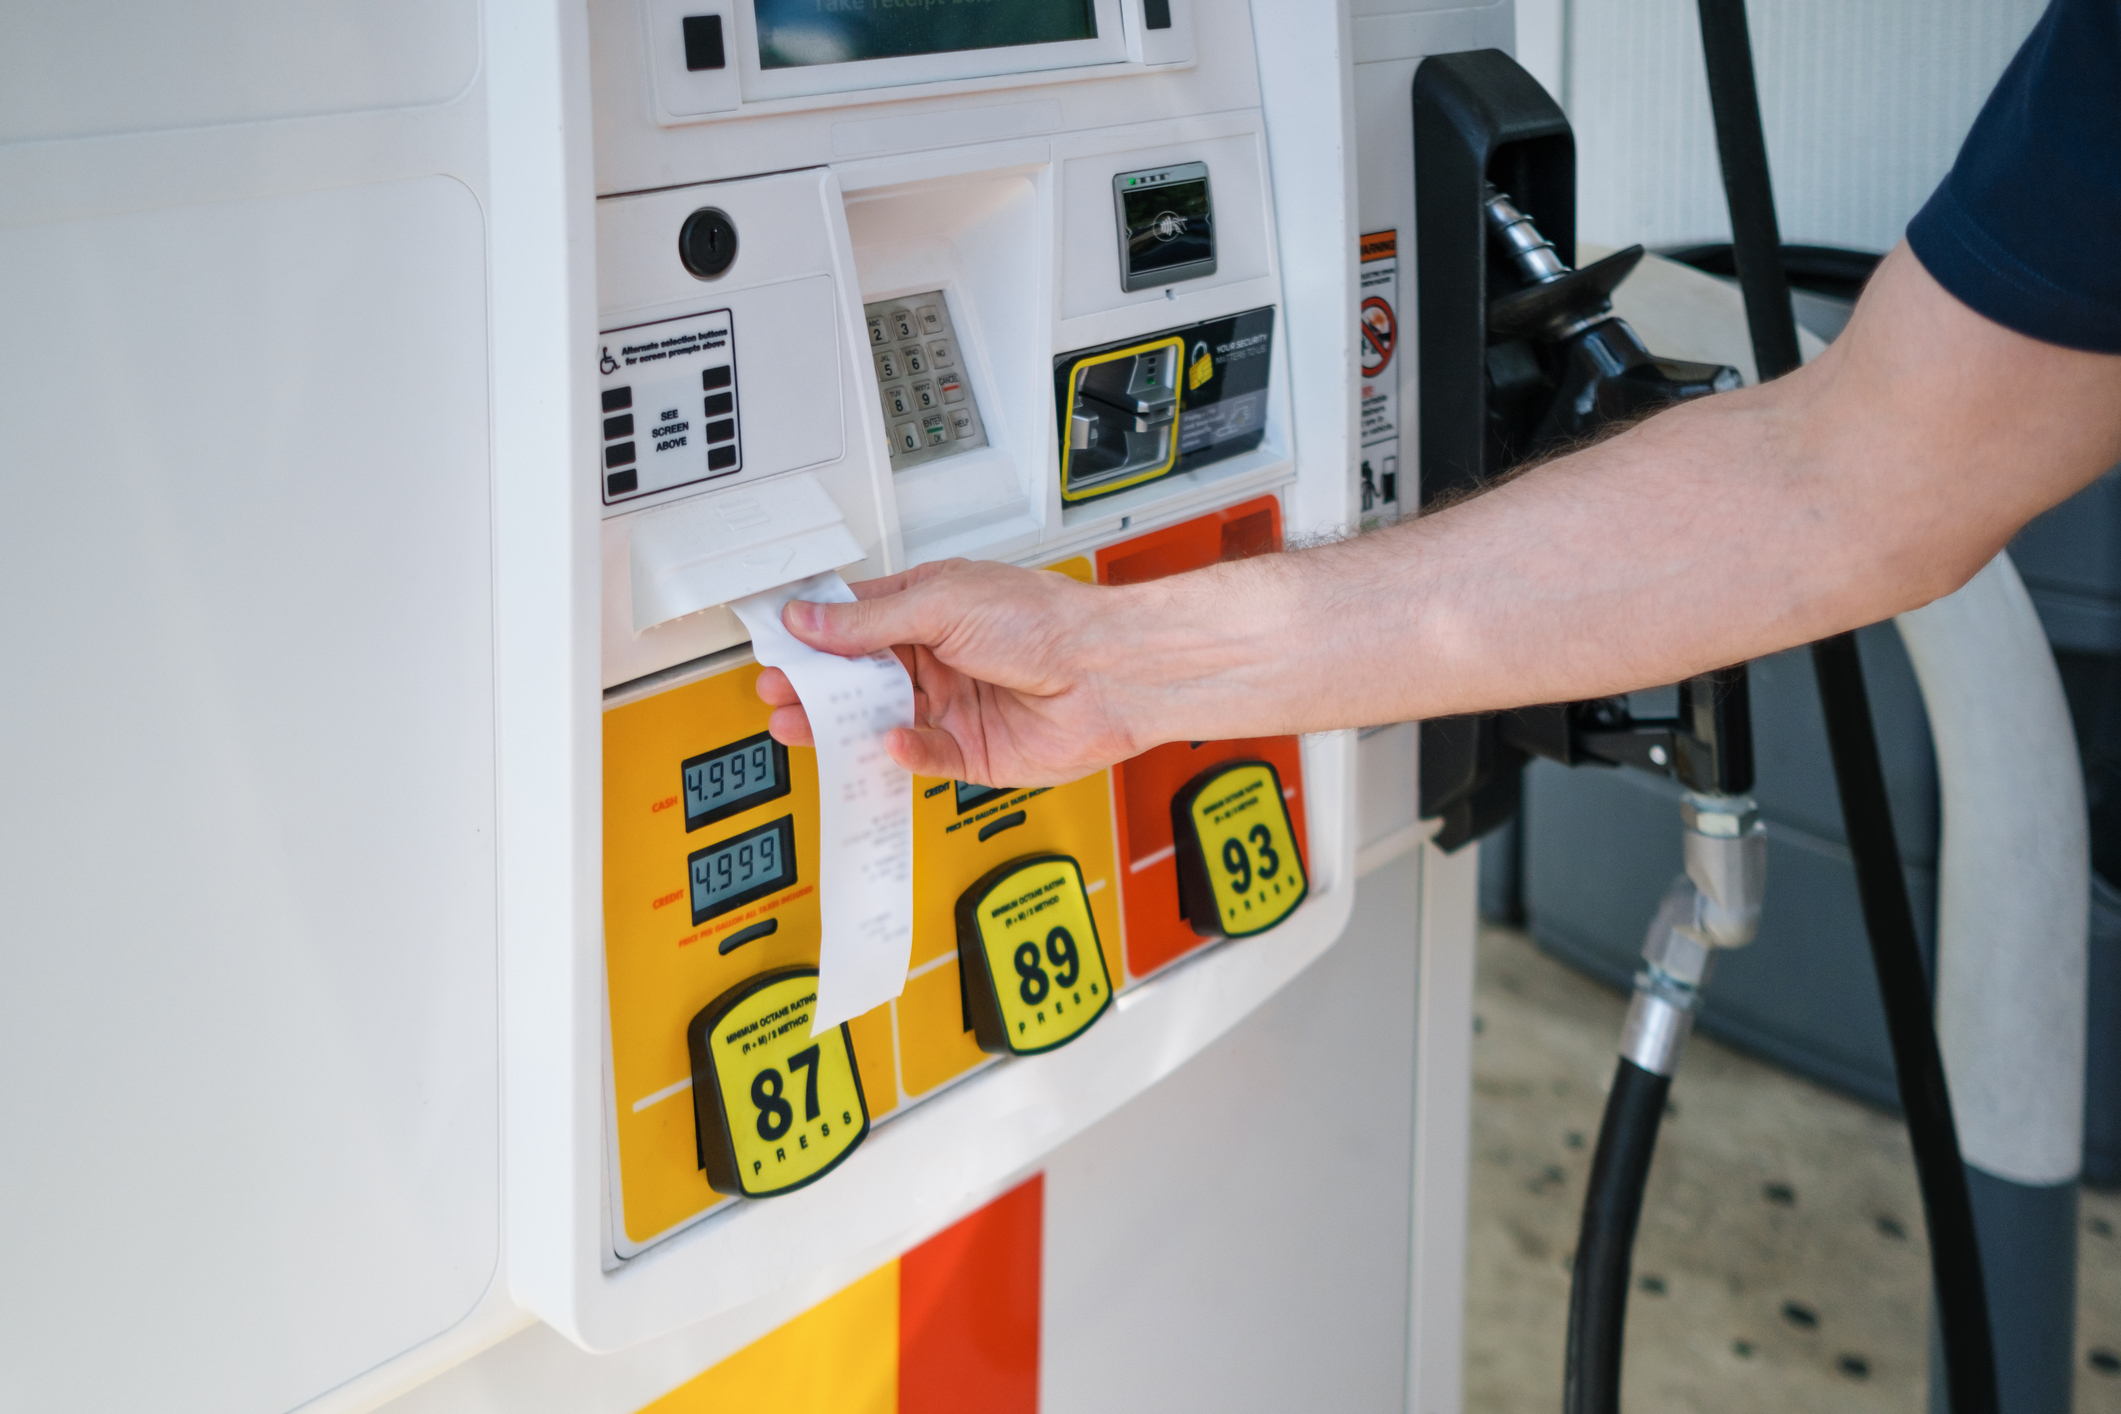 A person retrieves a printed receipt from a gas pump after filling up their vehicle. The gas prices for octane levels 87, 89, and 93 are displayed